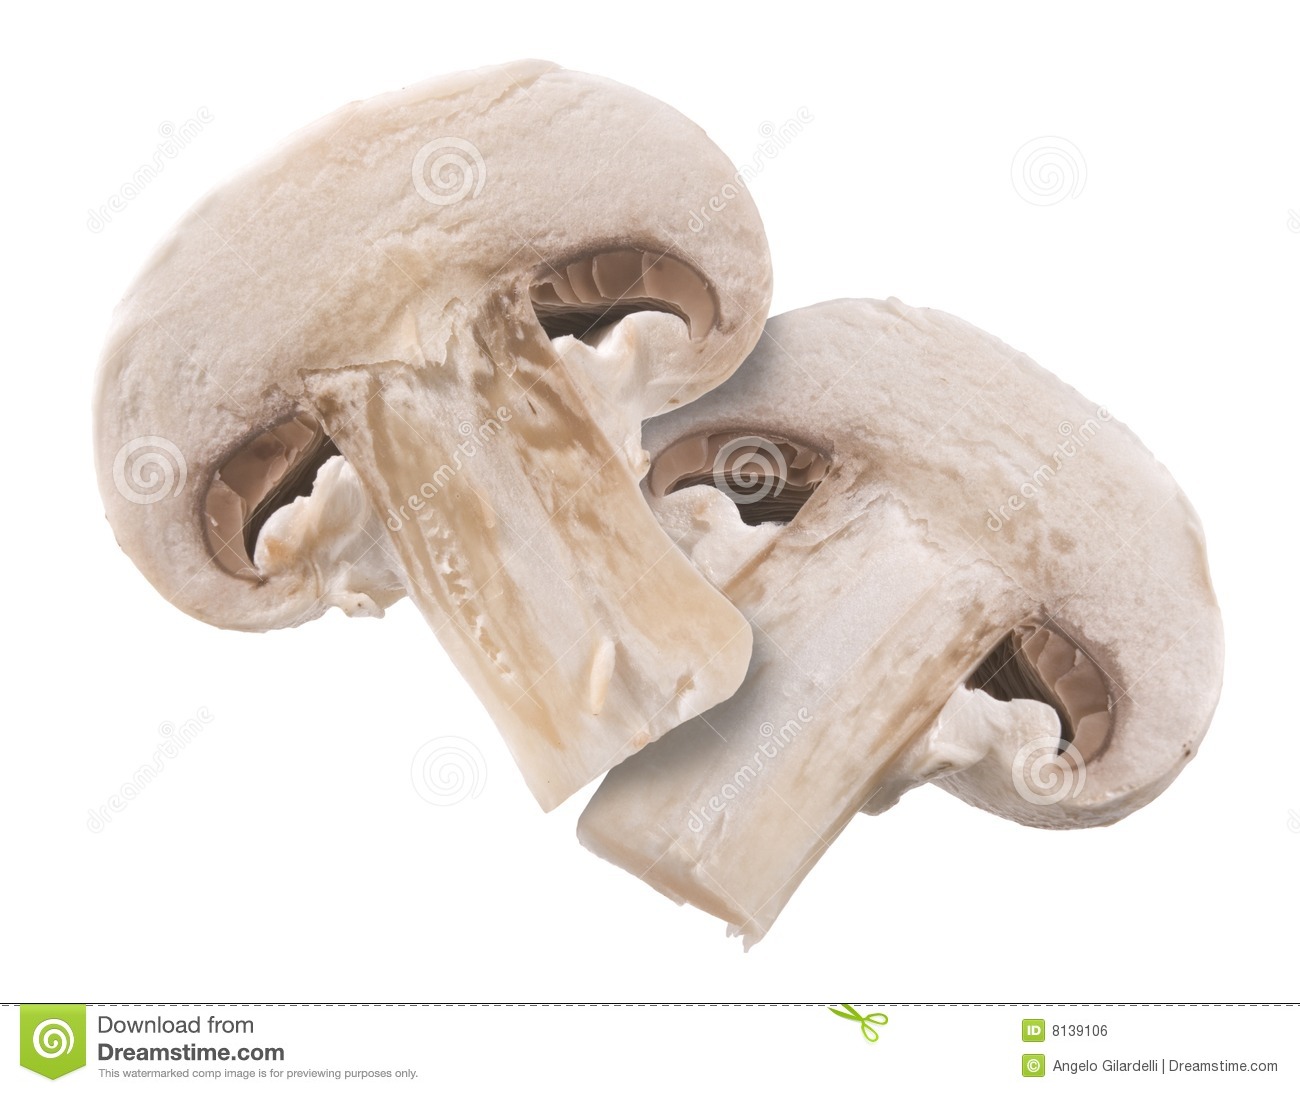 Two Slices Of Mushrooms Royalty Free Stock Image   Image  8139106